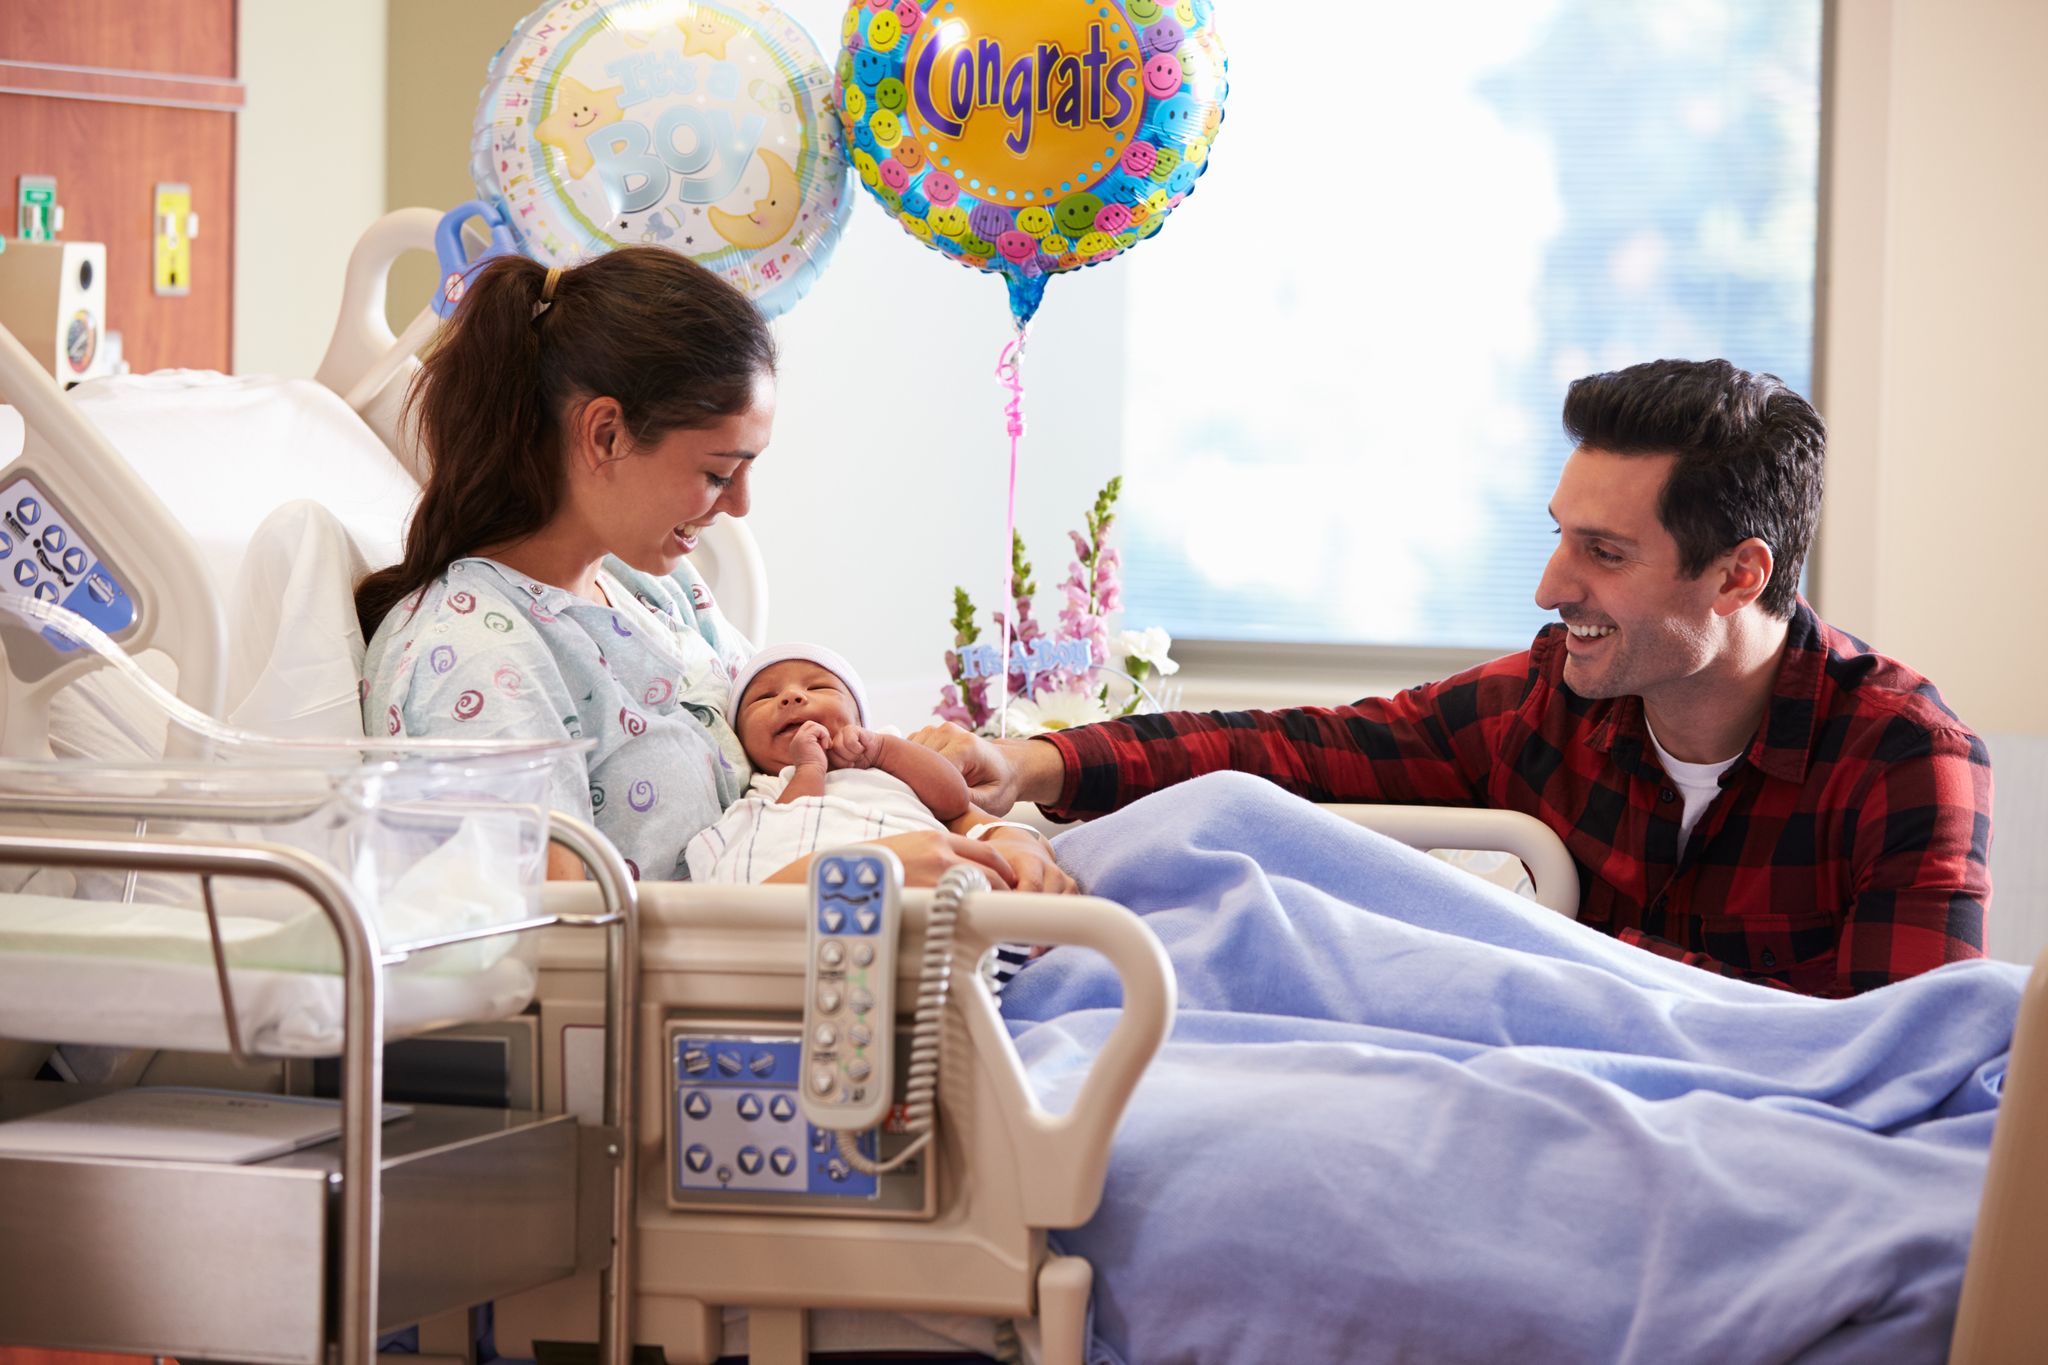 A couple with their newborn in the hospital. | Source: Shutterstock